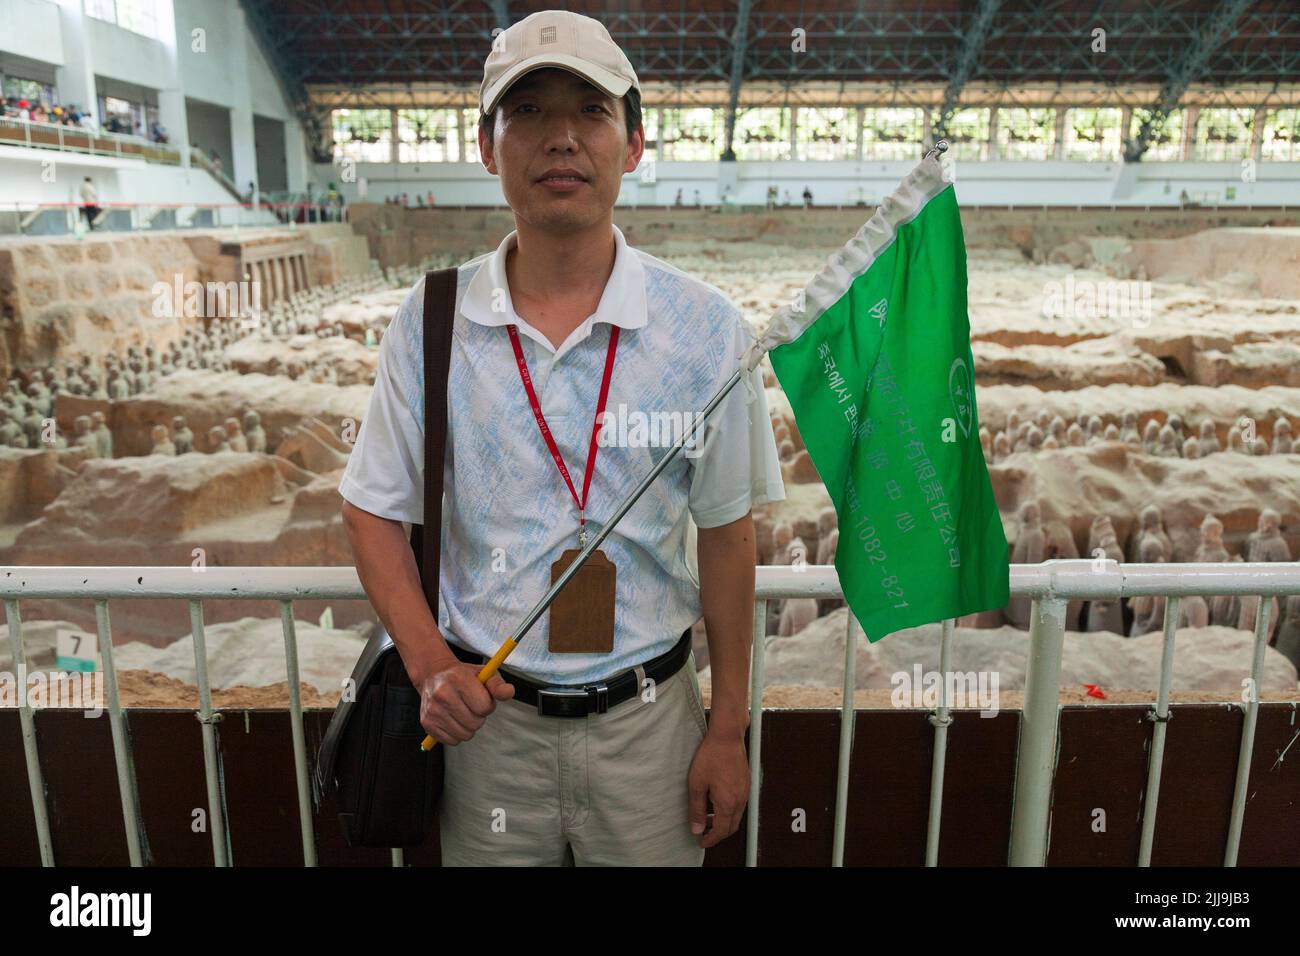 Tour guide with brightly coloured flag leading a party of Chinese tourists visiting / viewing pit 1 at The Terracotta Army at Emperor Qinshihuang's Mausoleum Site Museum in  Xi'An, China. PRC. (125) Stock Photo